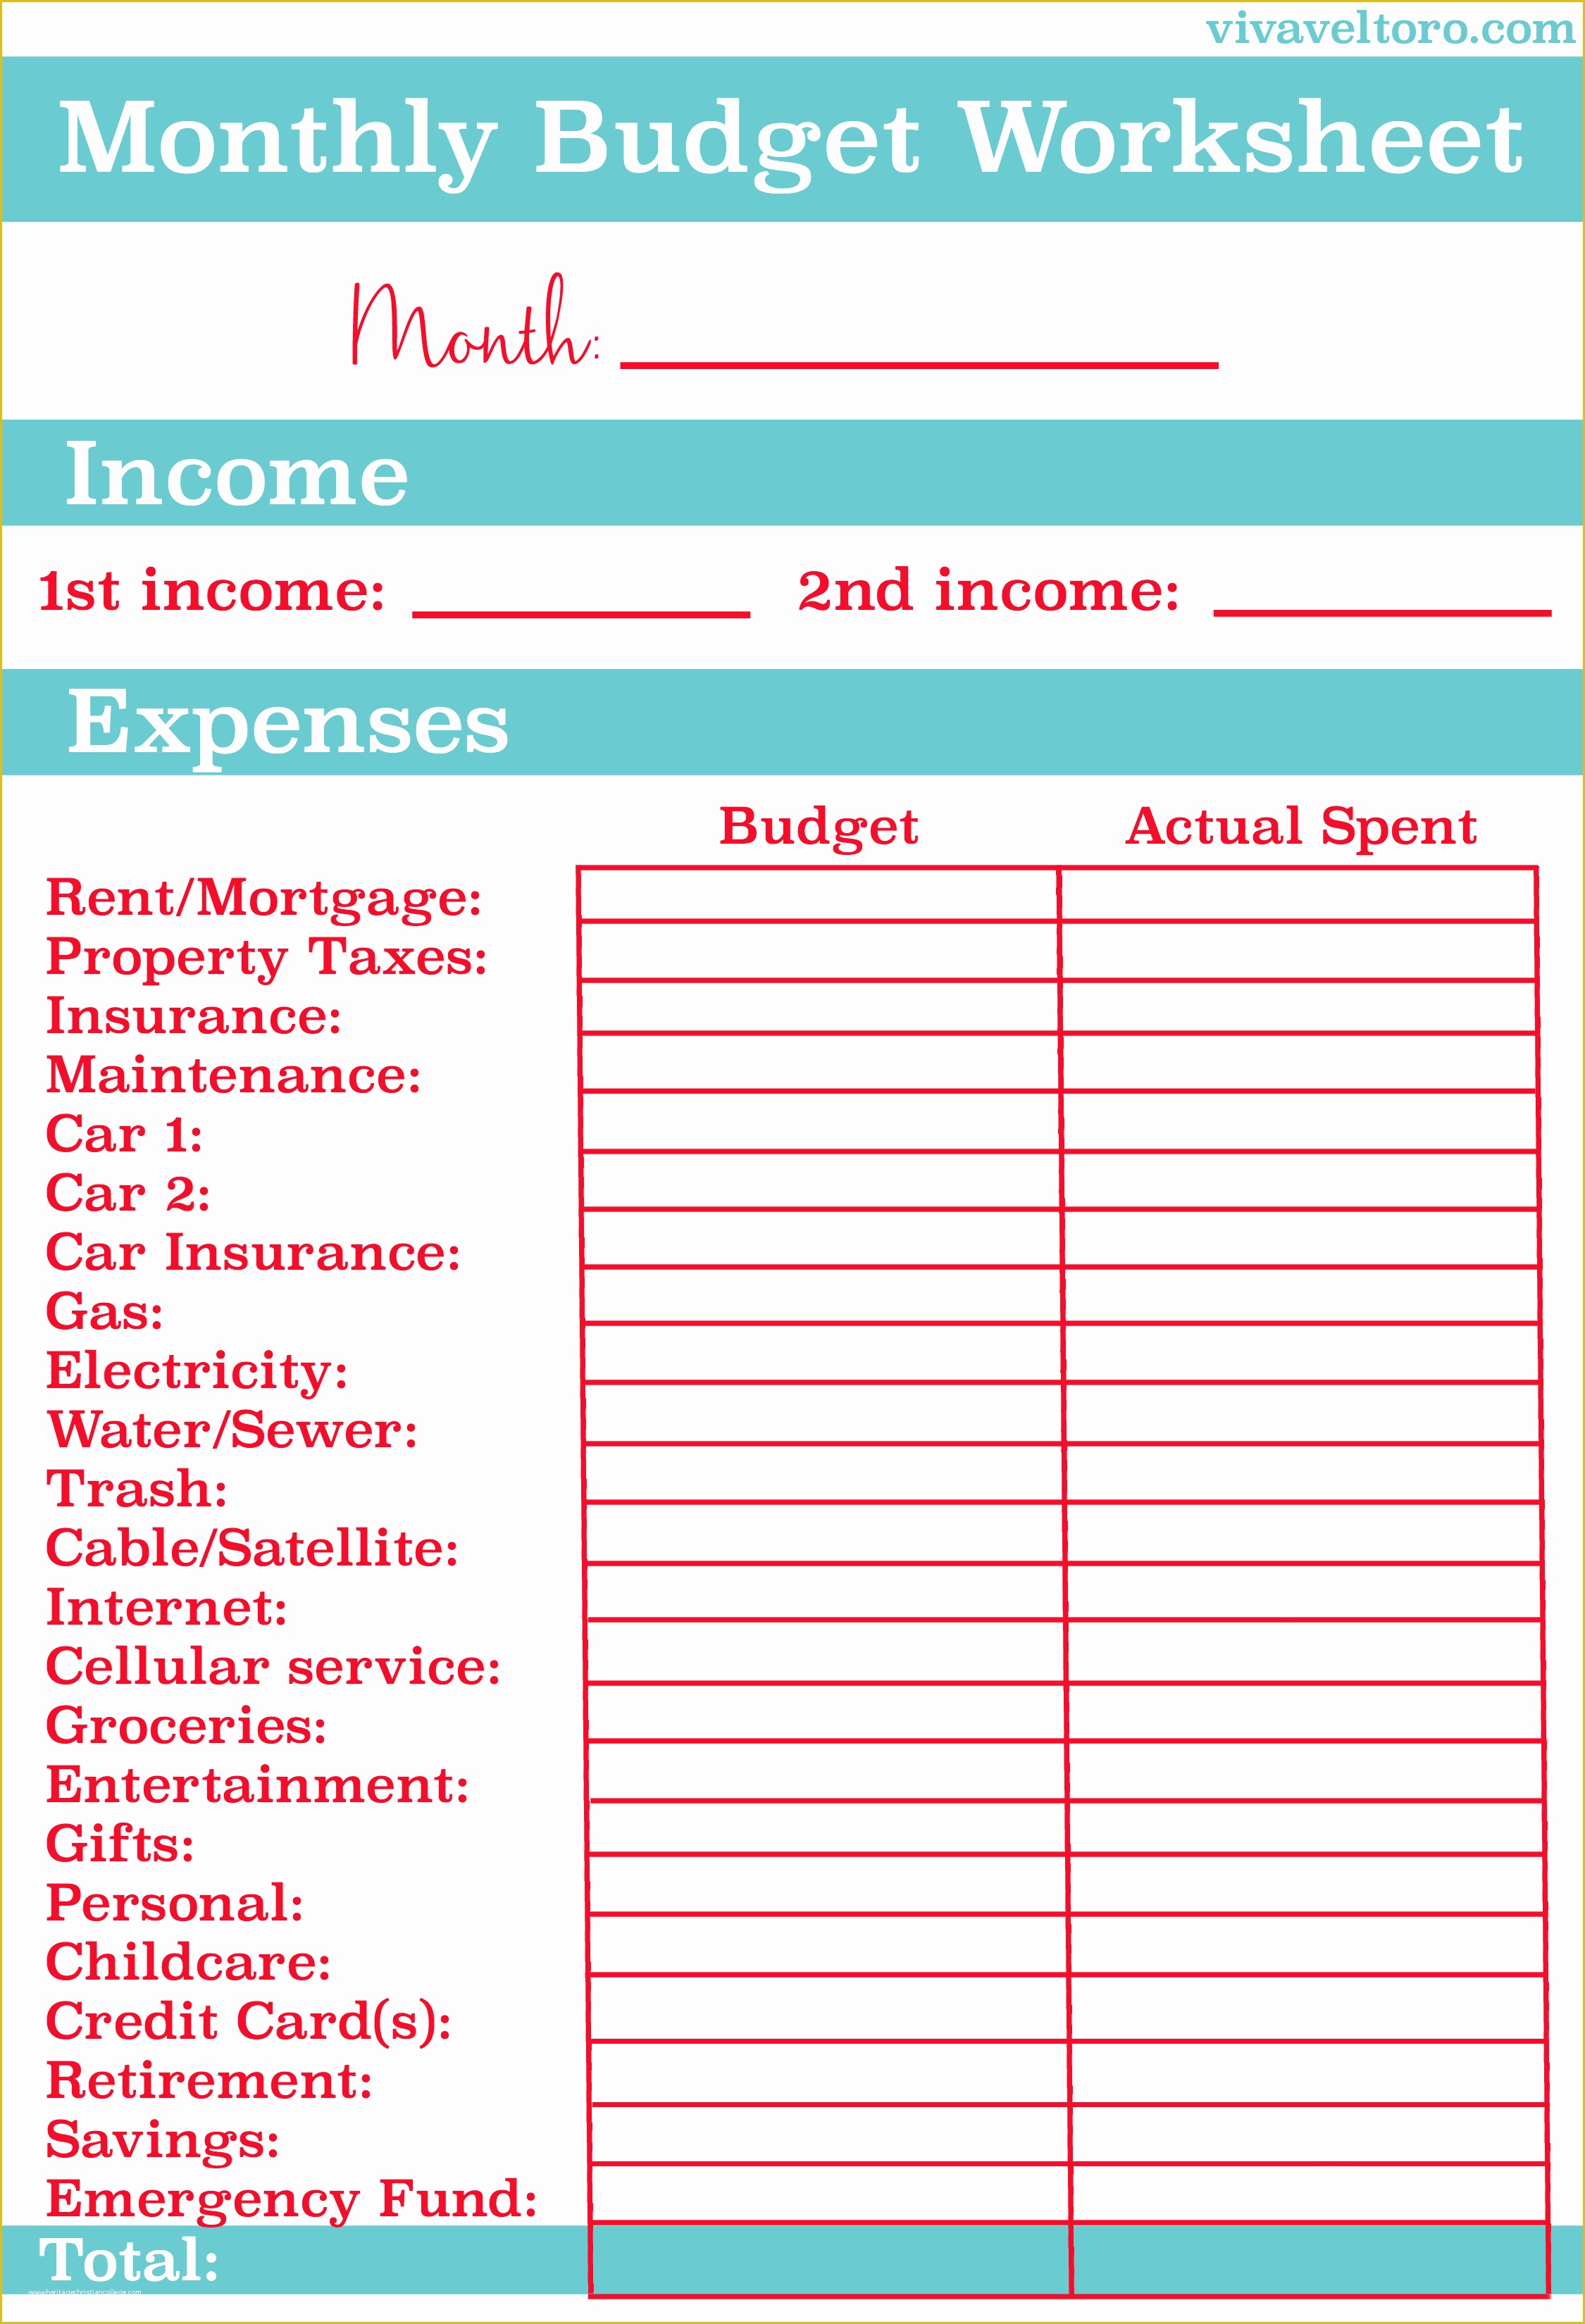 Monthly Budget Sheet Template Free Of Take Control Of Your Personal Finances with This Free